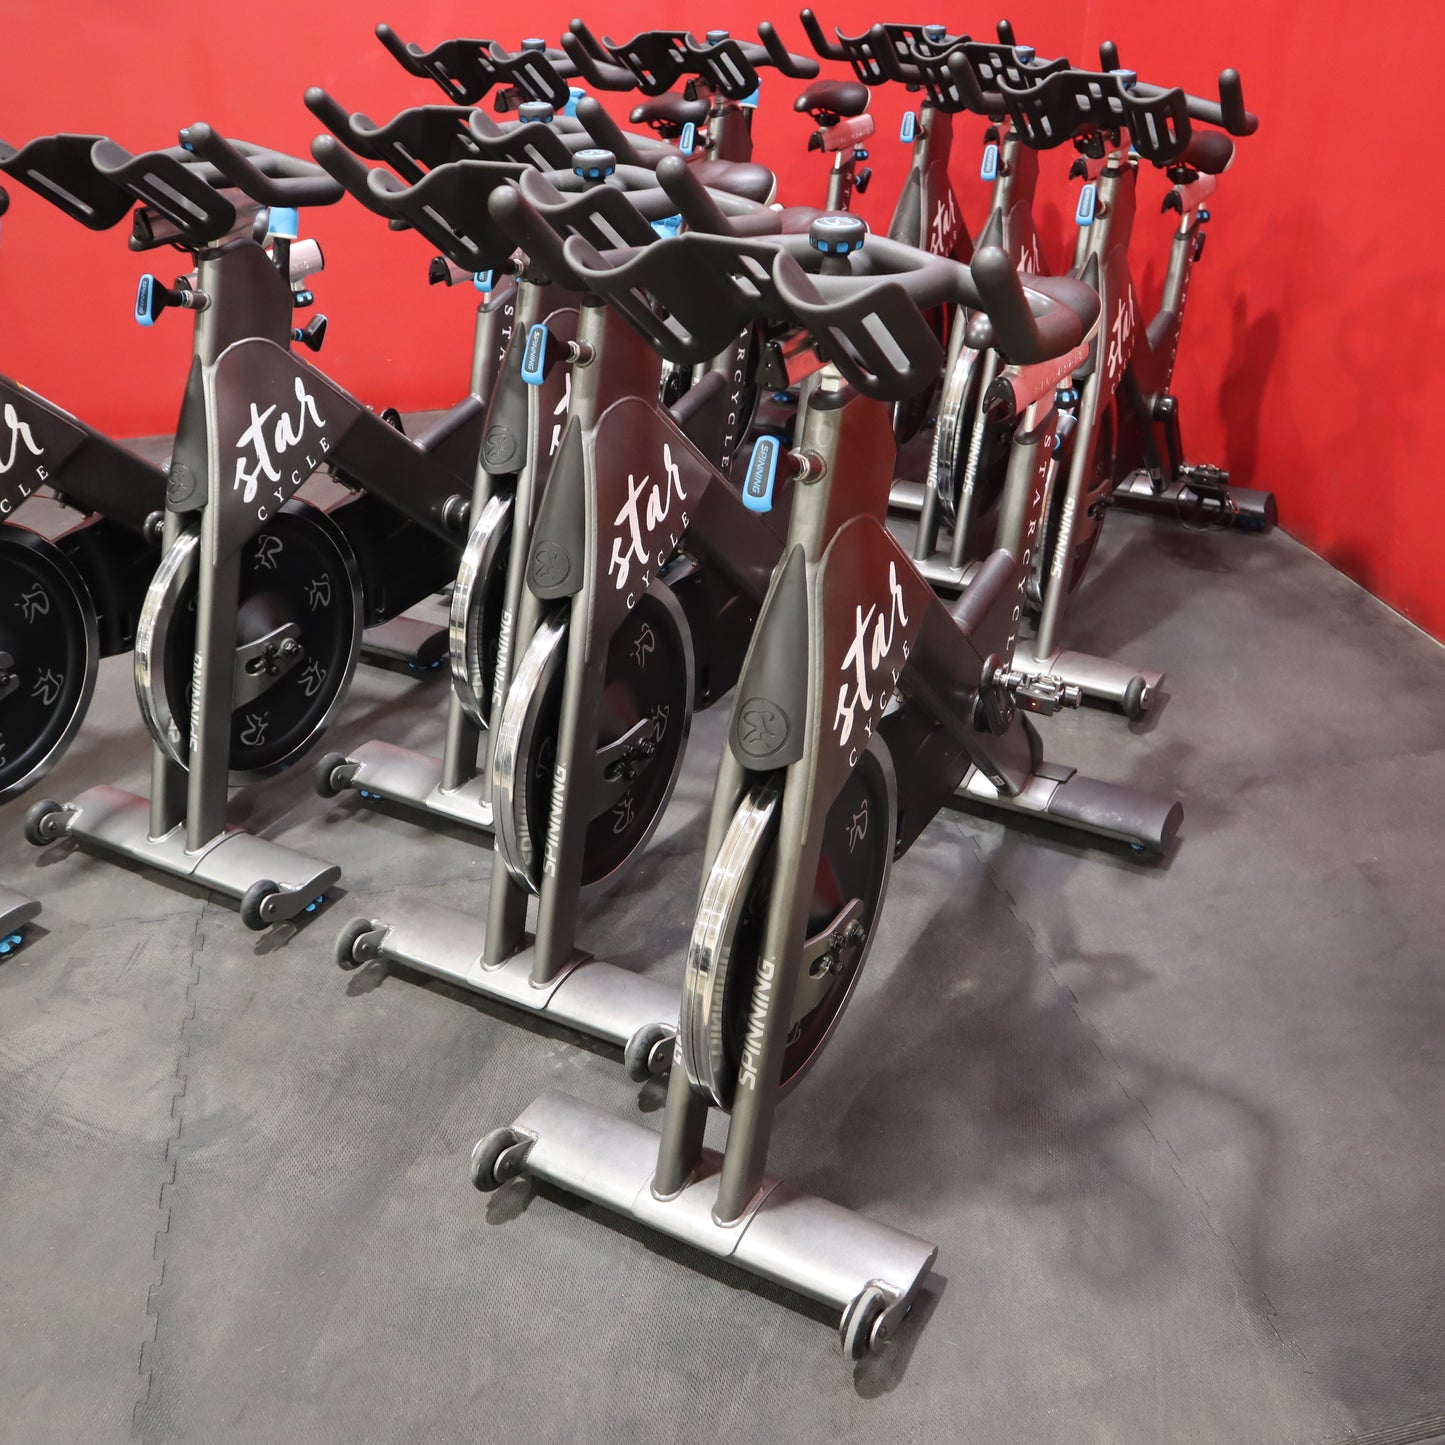 Precor SBK Indoor Cycle Package of 10 (Refurbished)